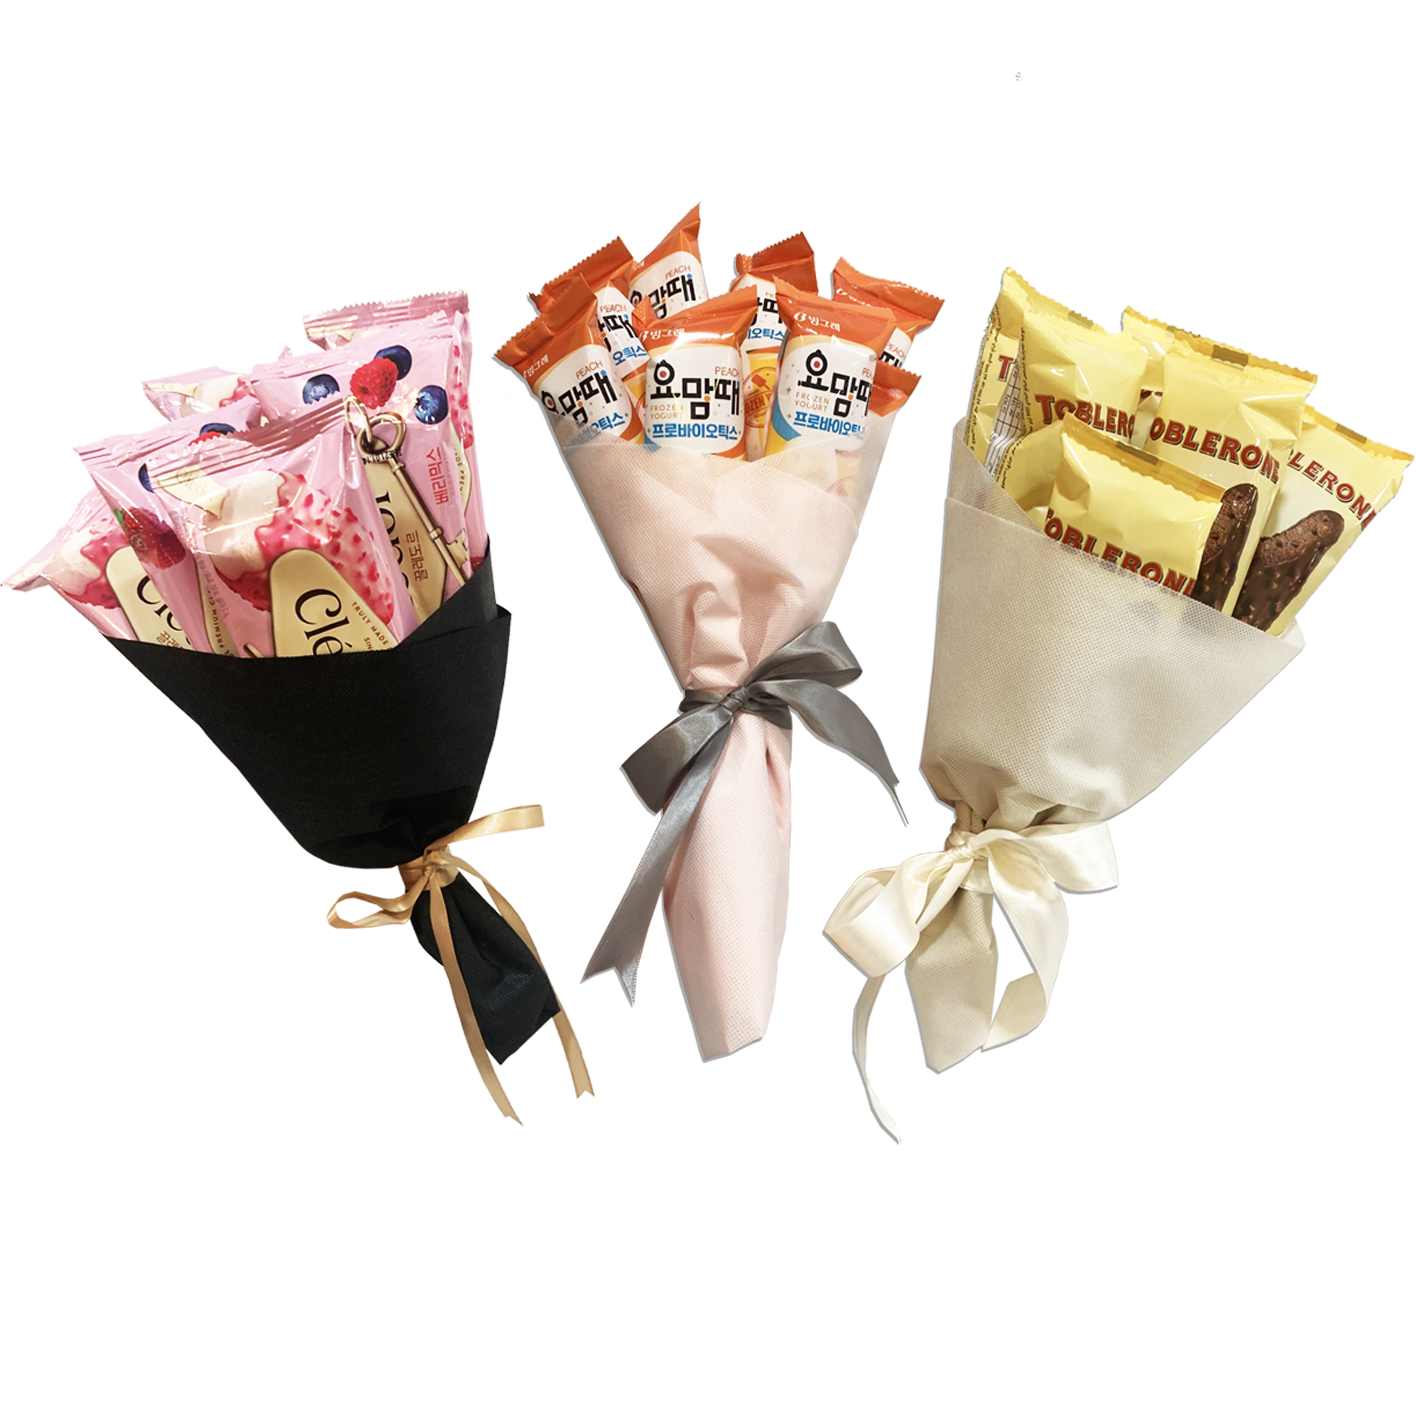 ICE CREAM BOUQUET WRAPPING SERVICE (Pre-Order for Next Day Delivery, Ice Cream Sold Separately)